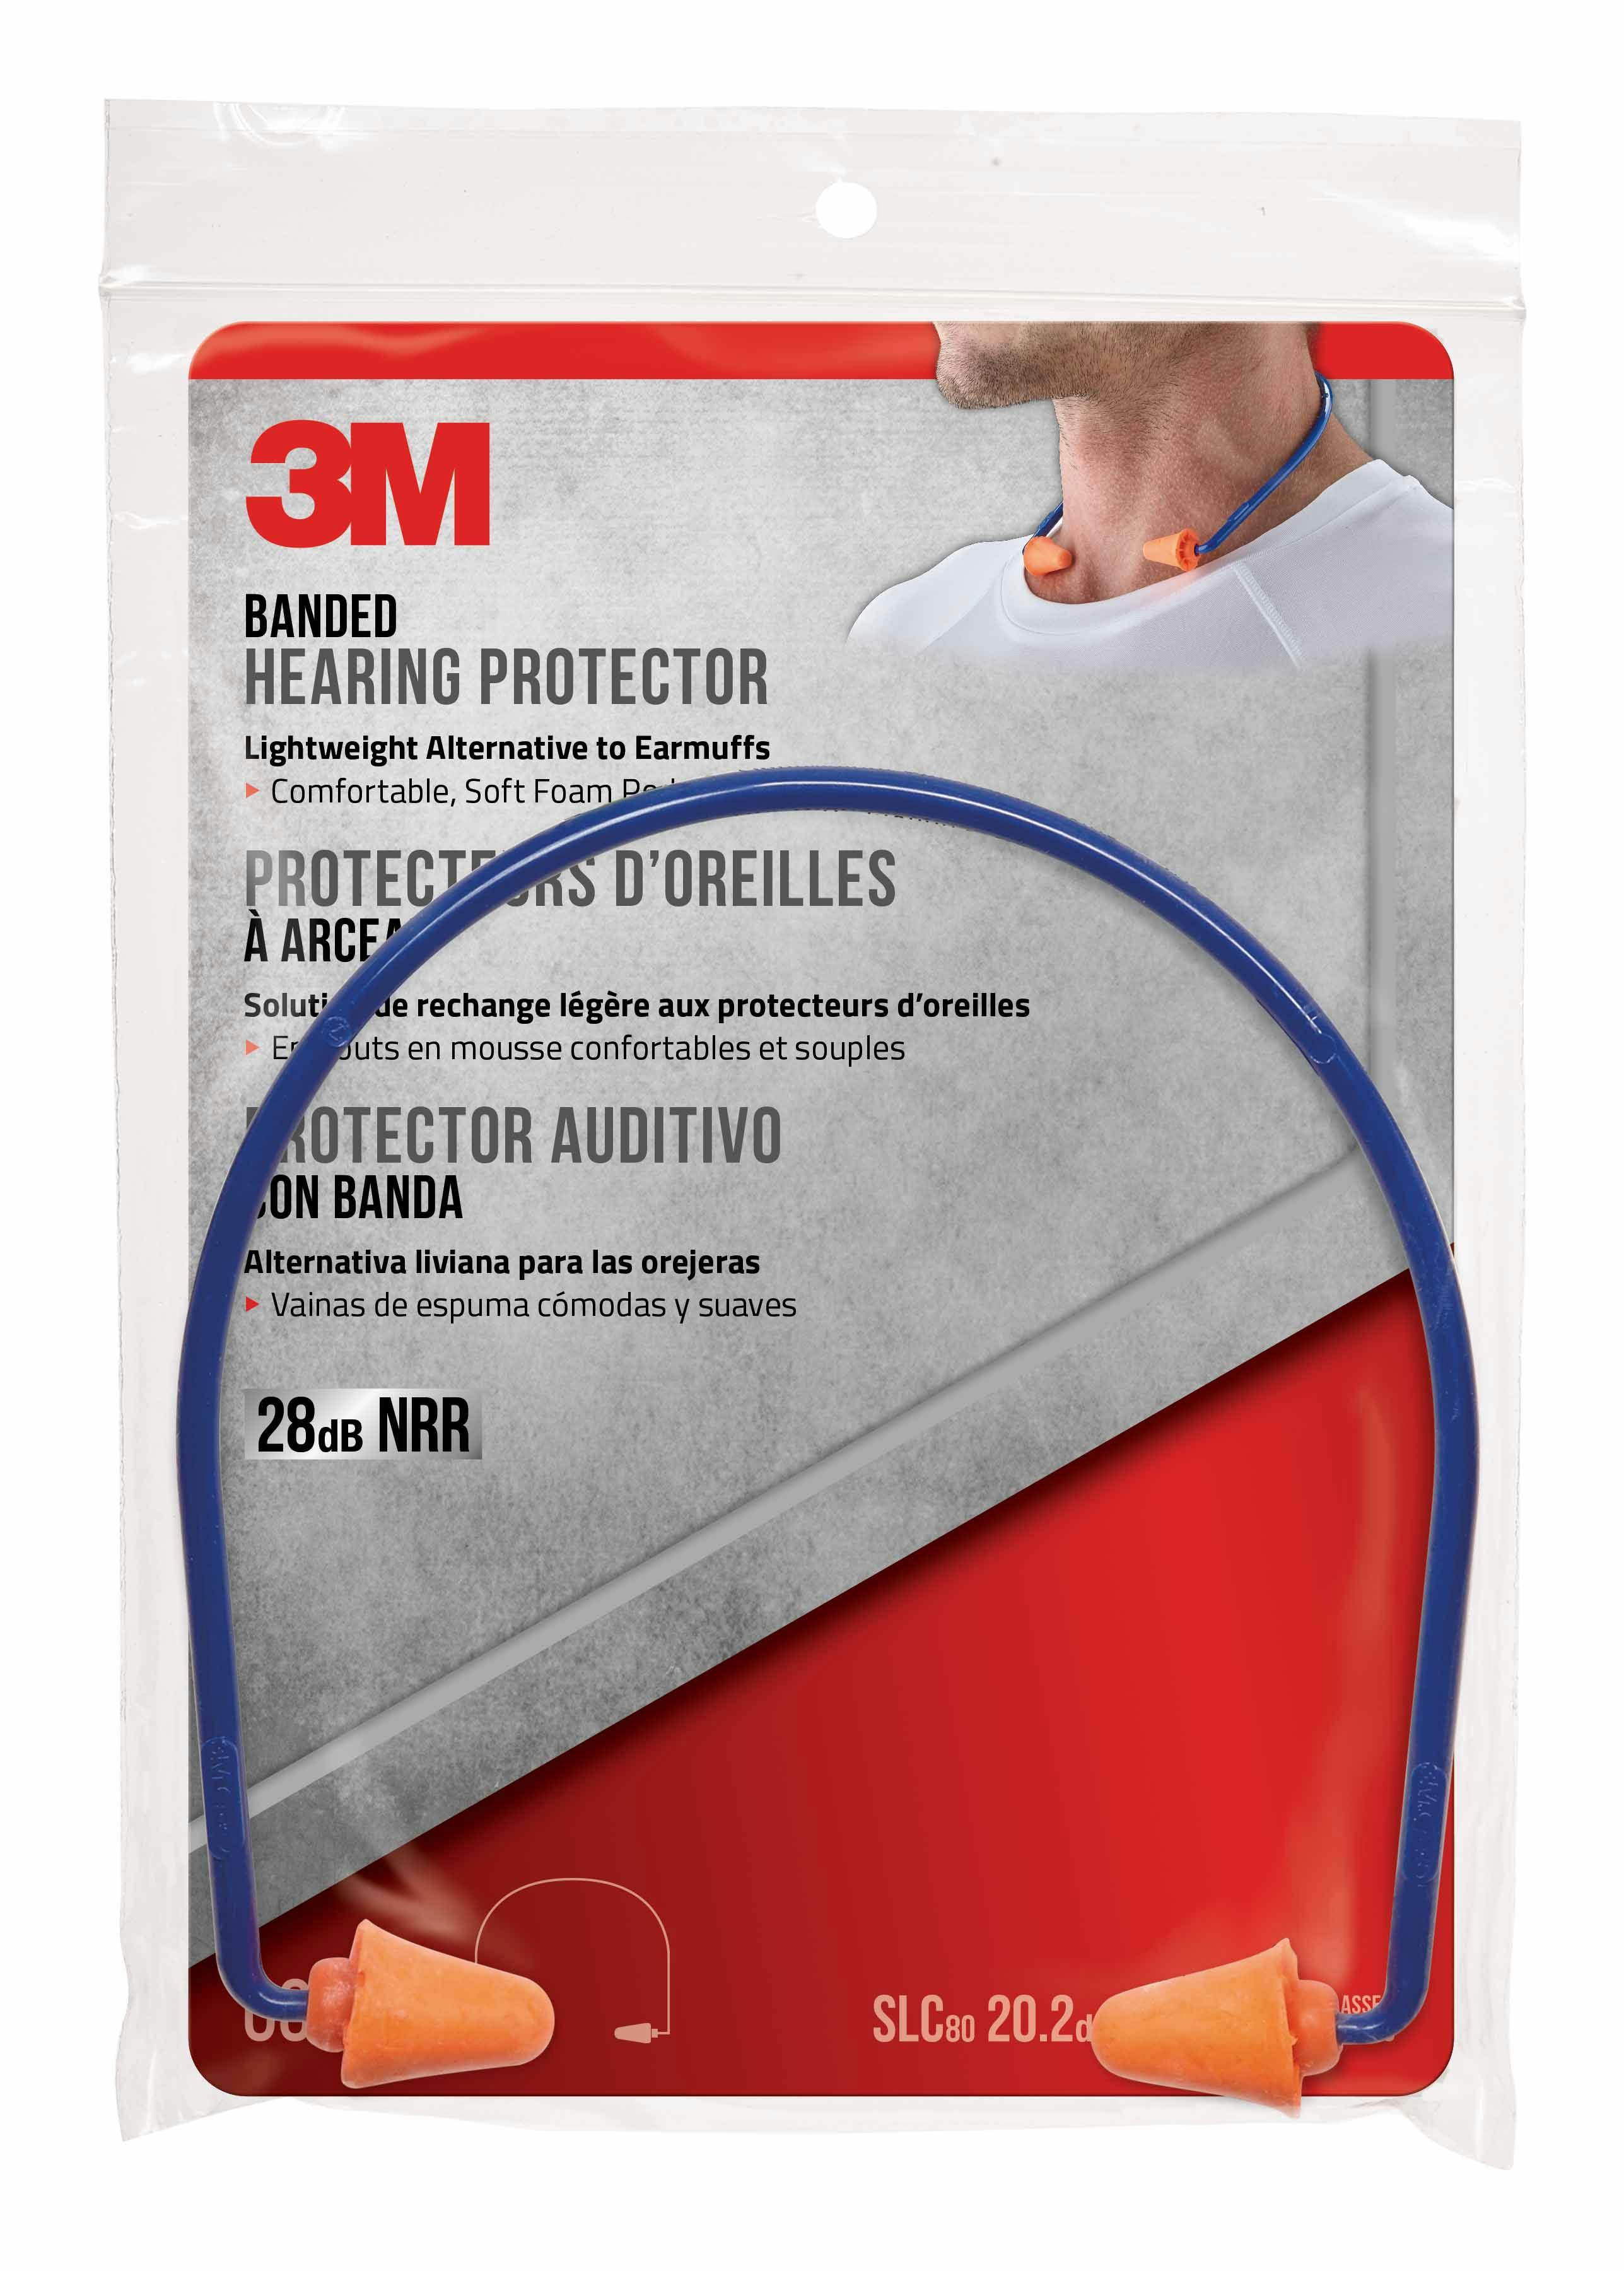 3M™ Banded Hearing Protector, 90537H1-DC, 6/case